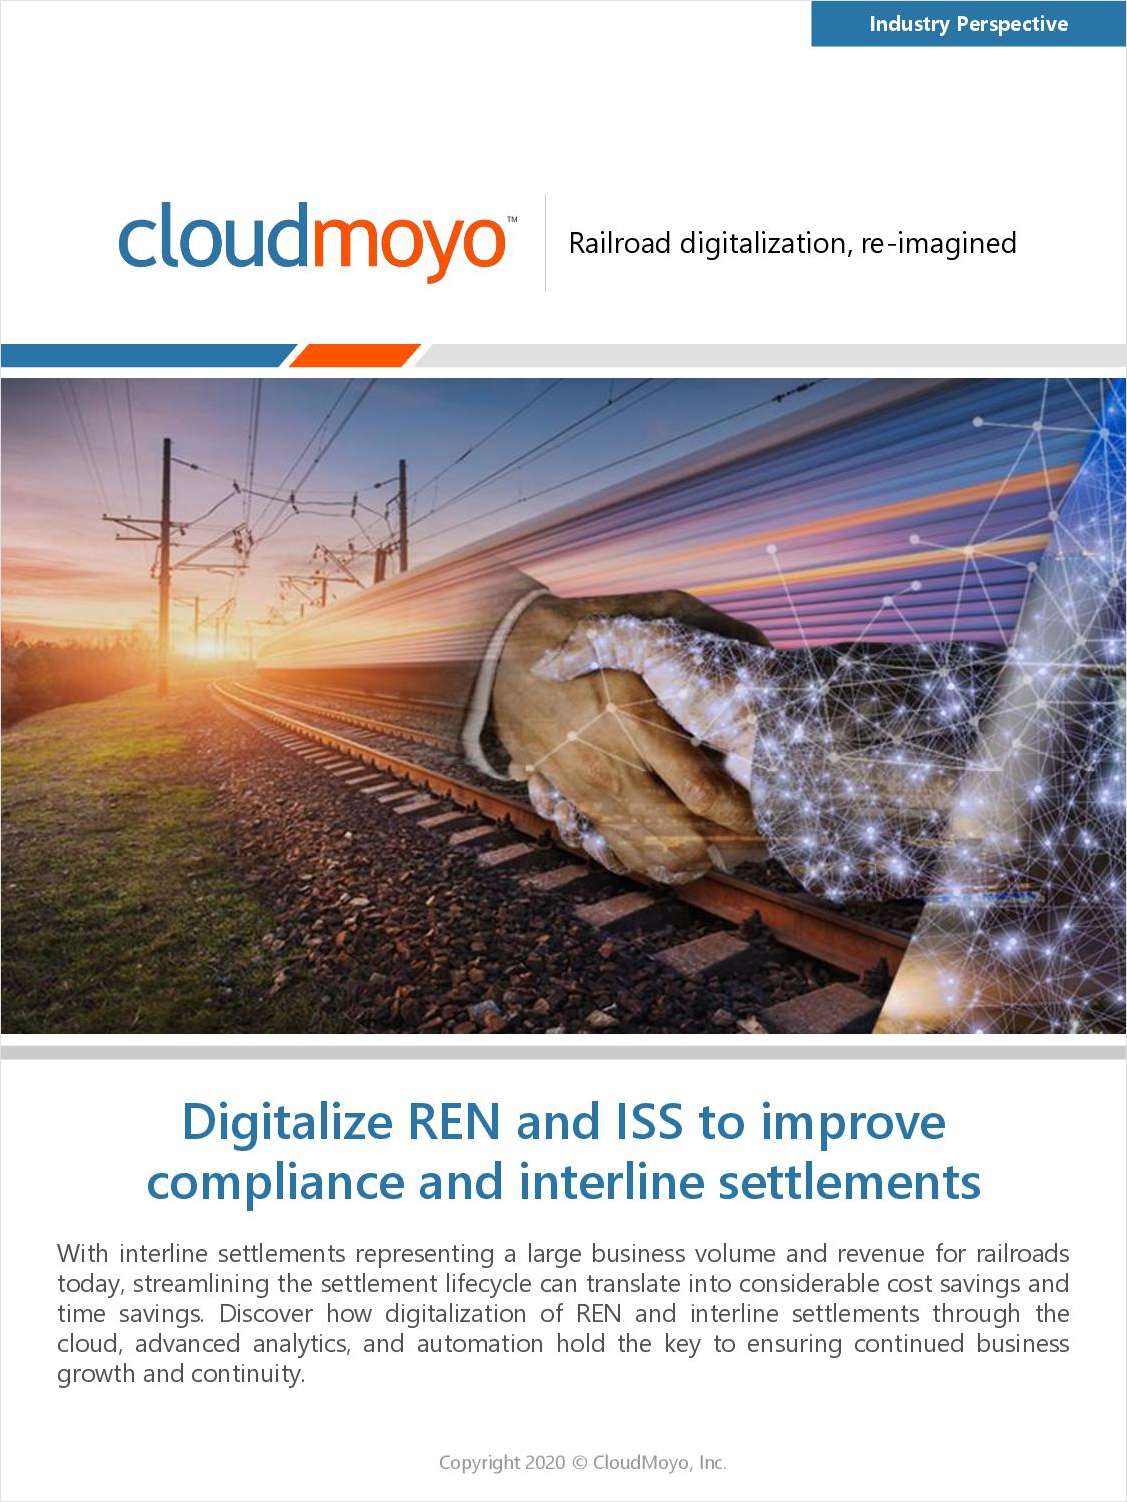 Digitalize REN and ISS to Improve Compliance and Interline Settlements